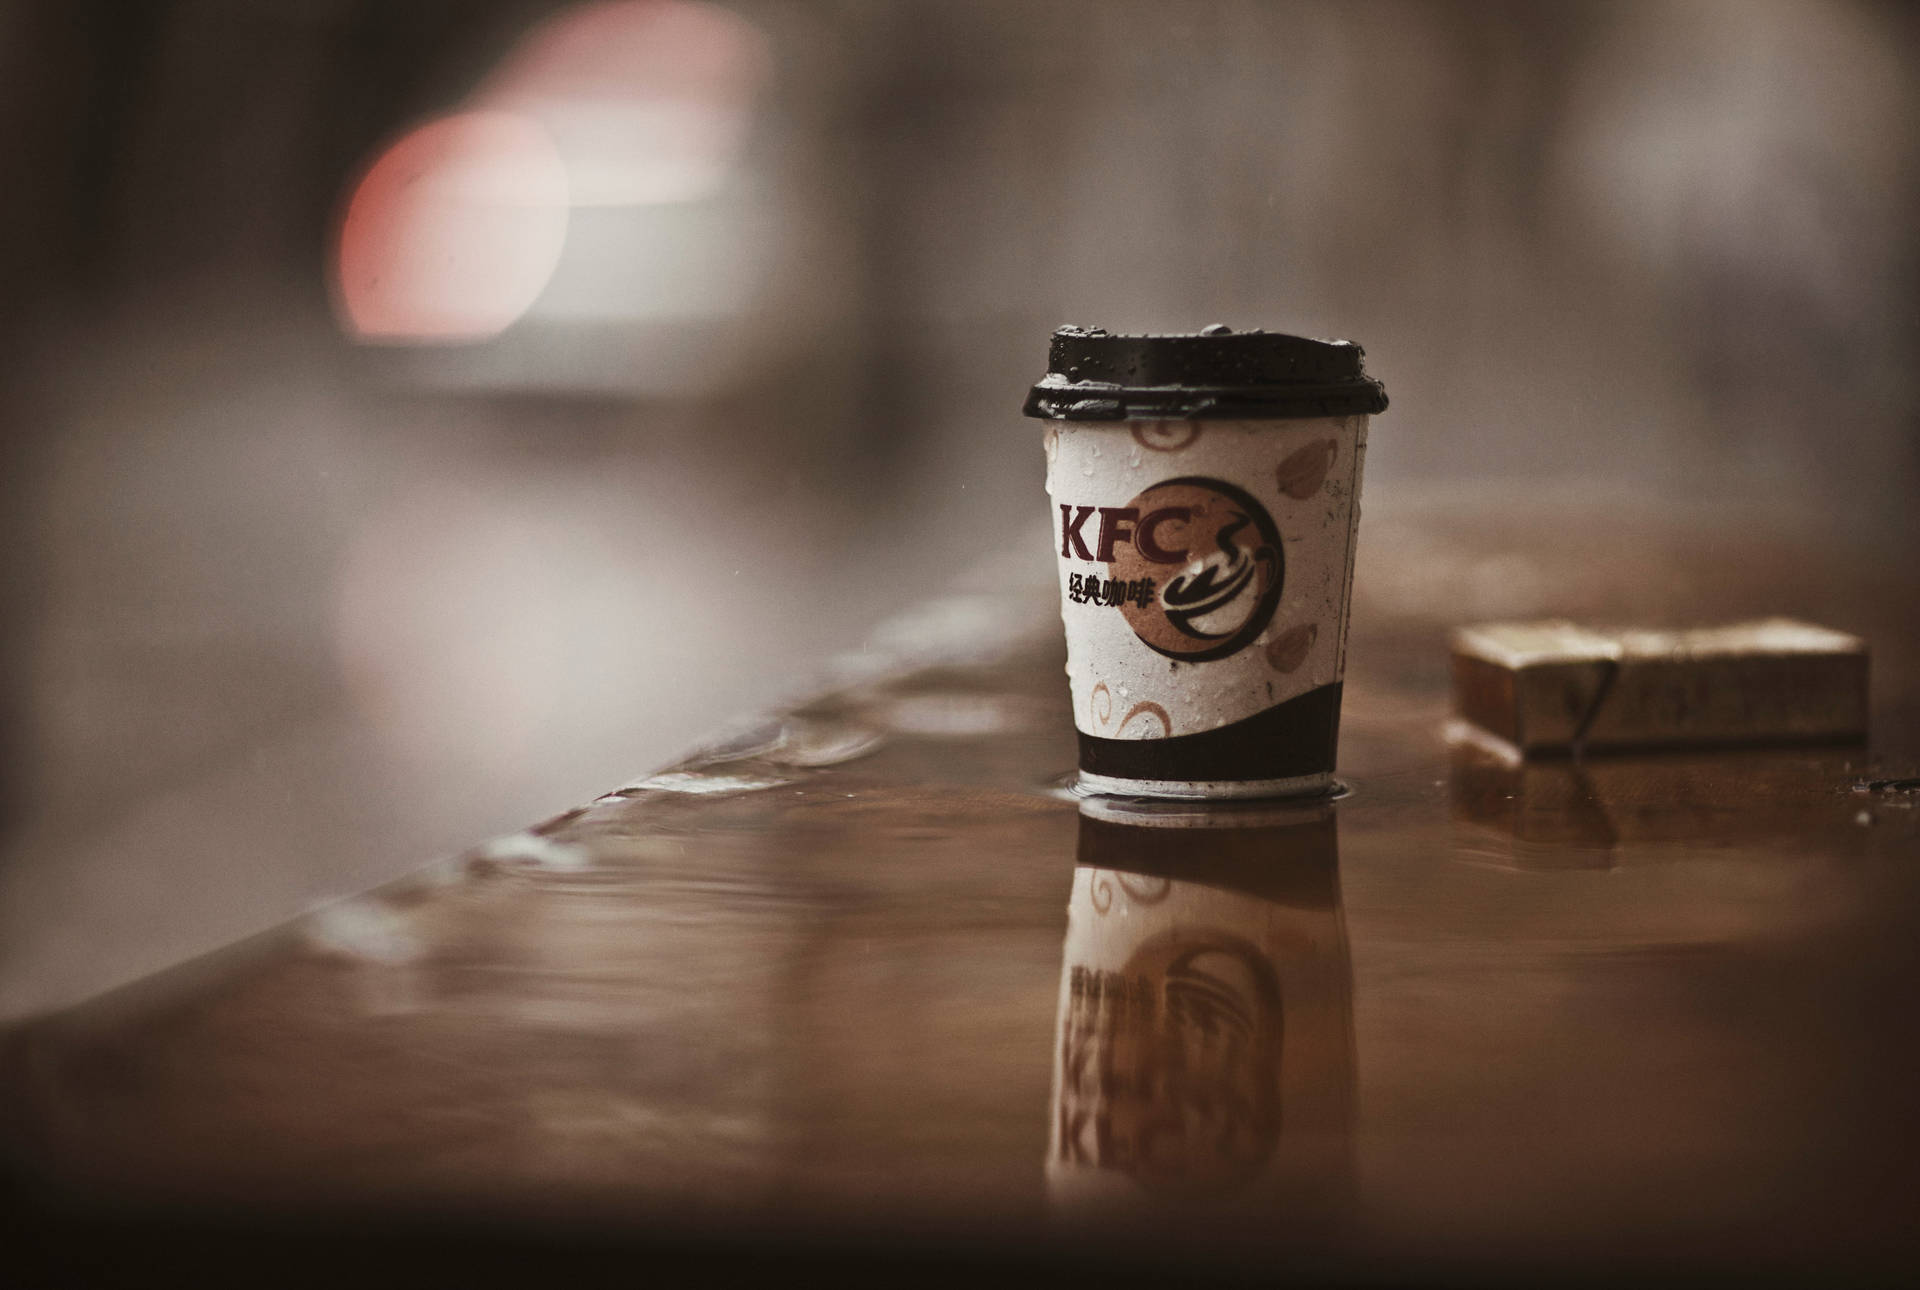 Kfc Paper Cup Photography Background